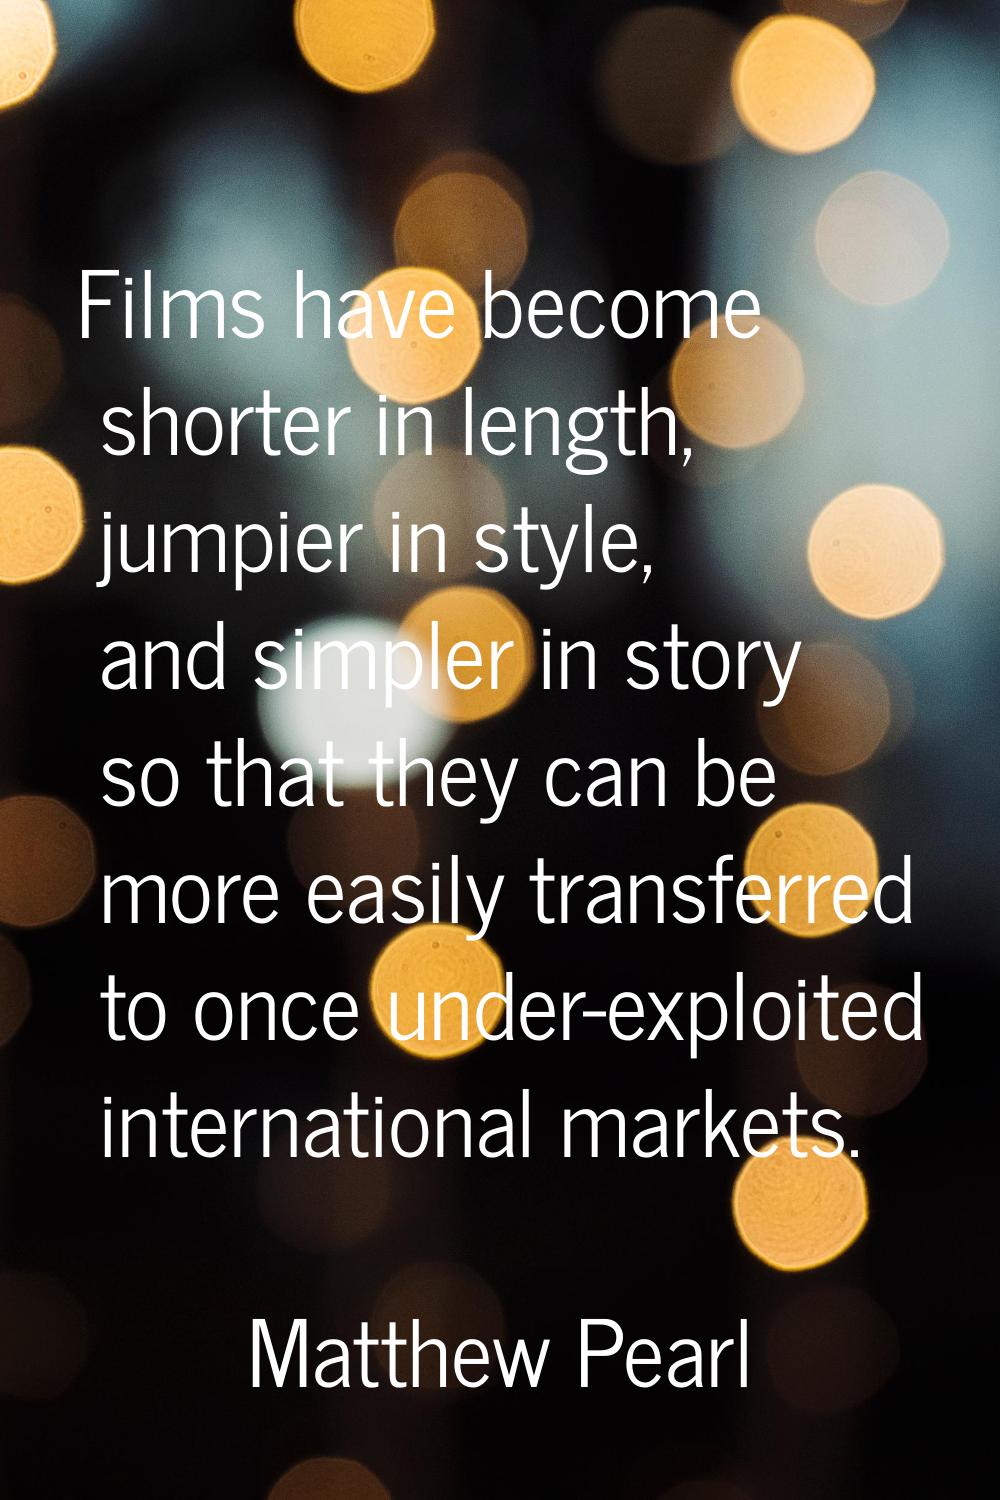 Films have become shorter in length, jumpier in style, and simpler in story so that they can be mor